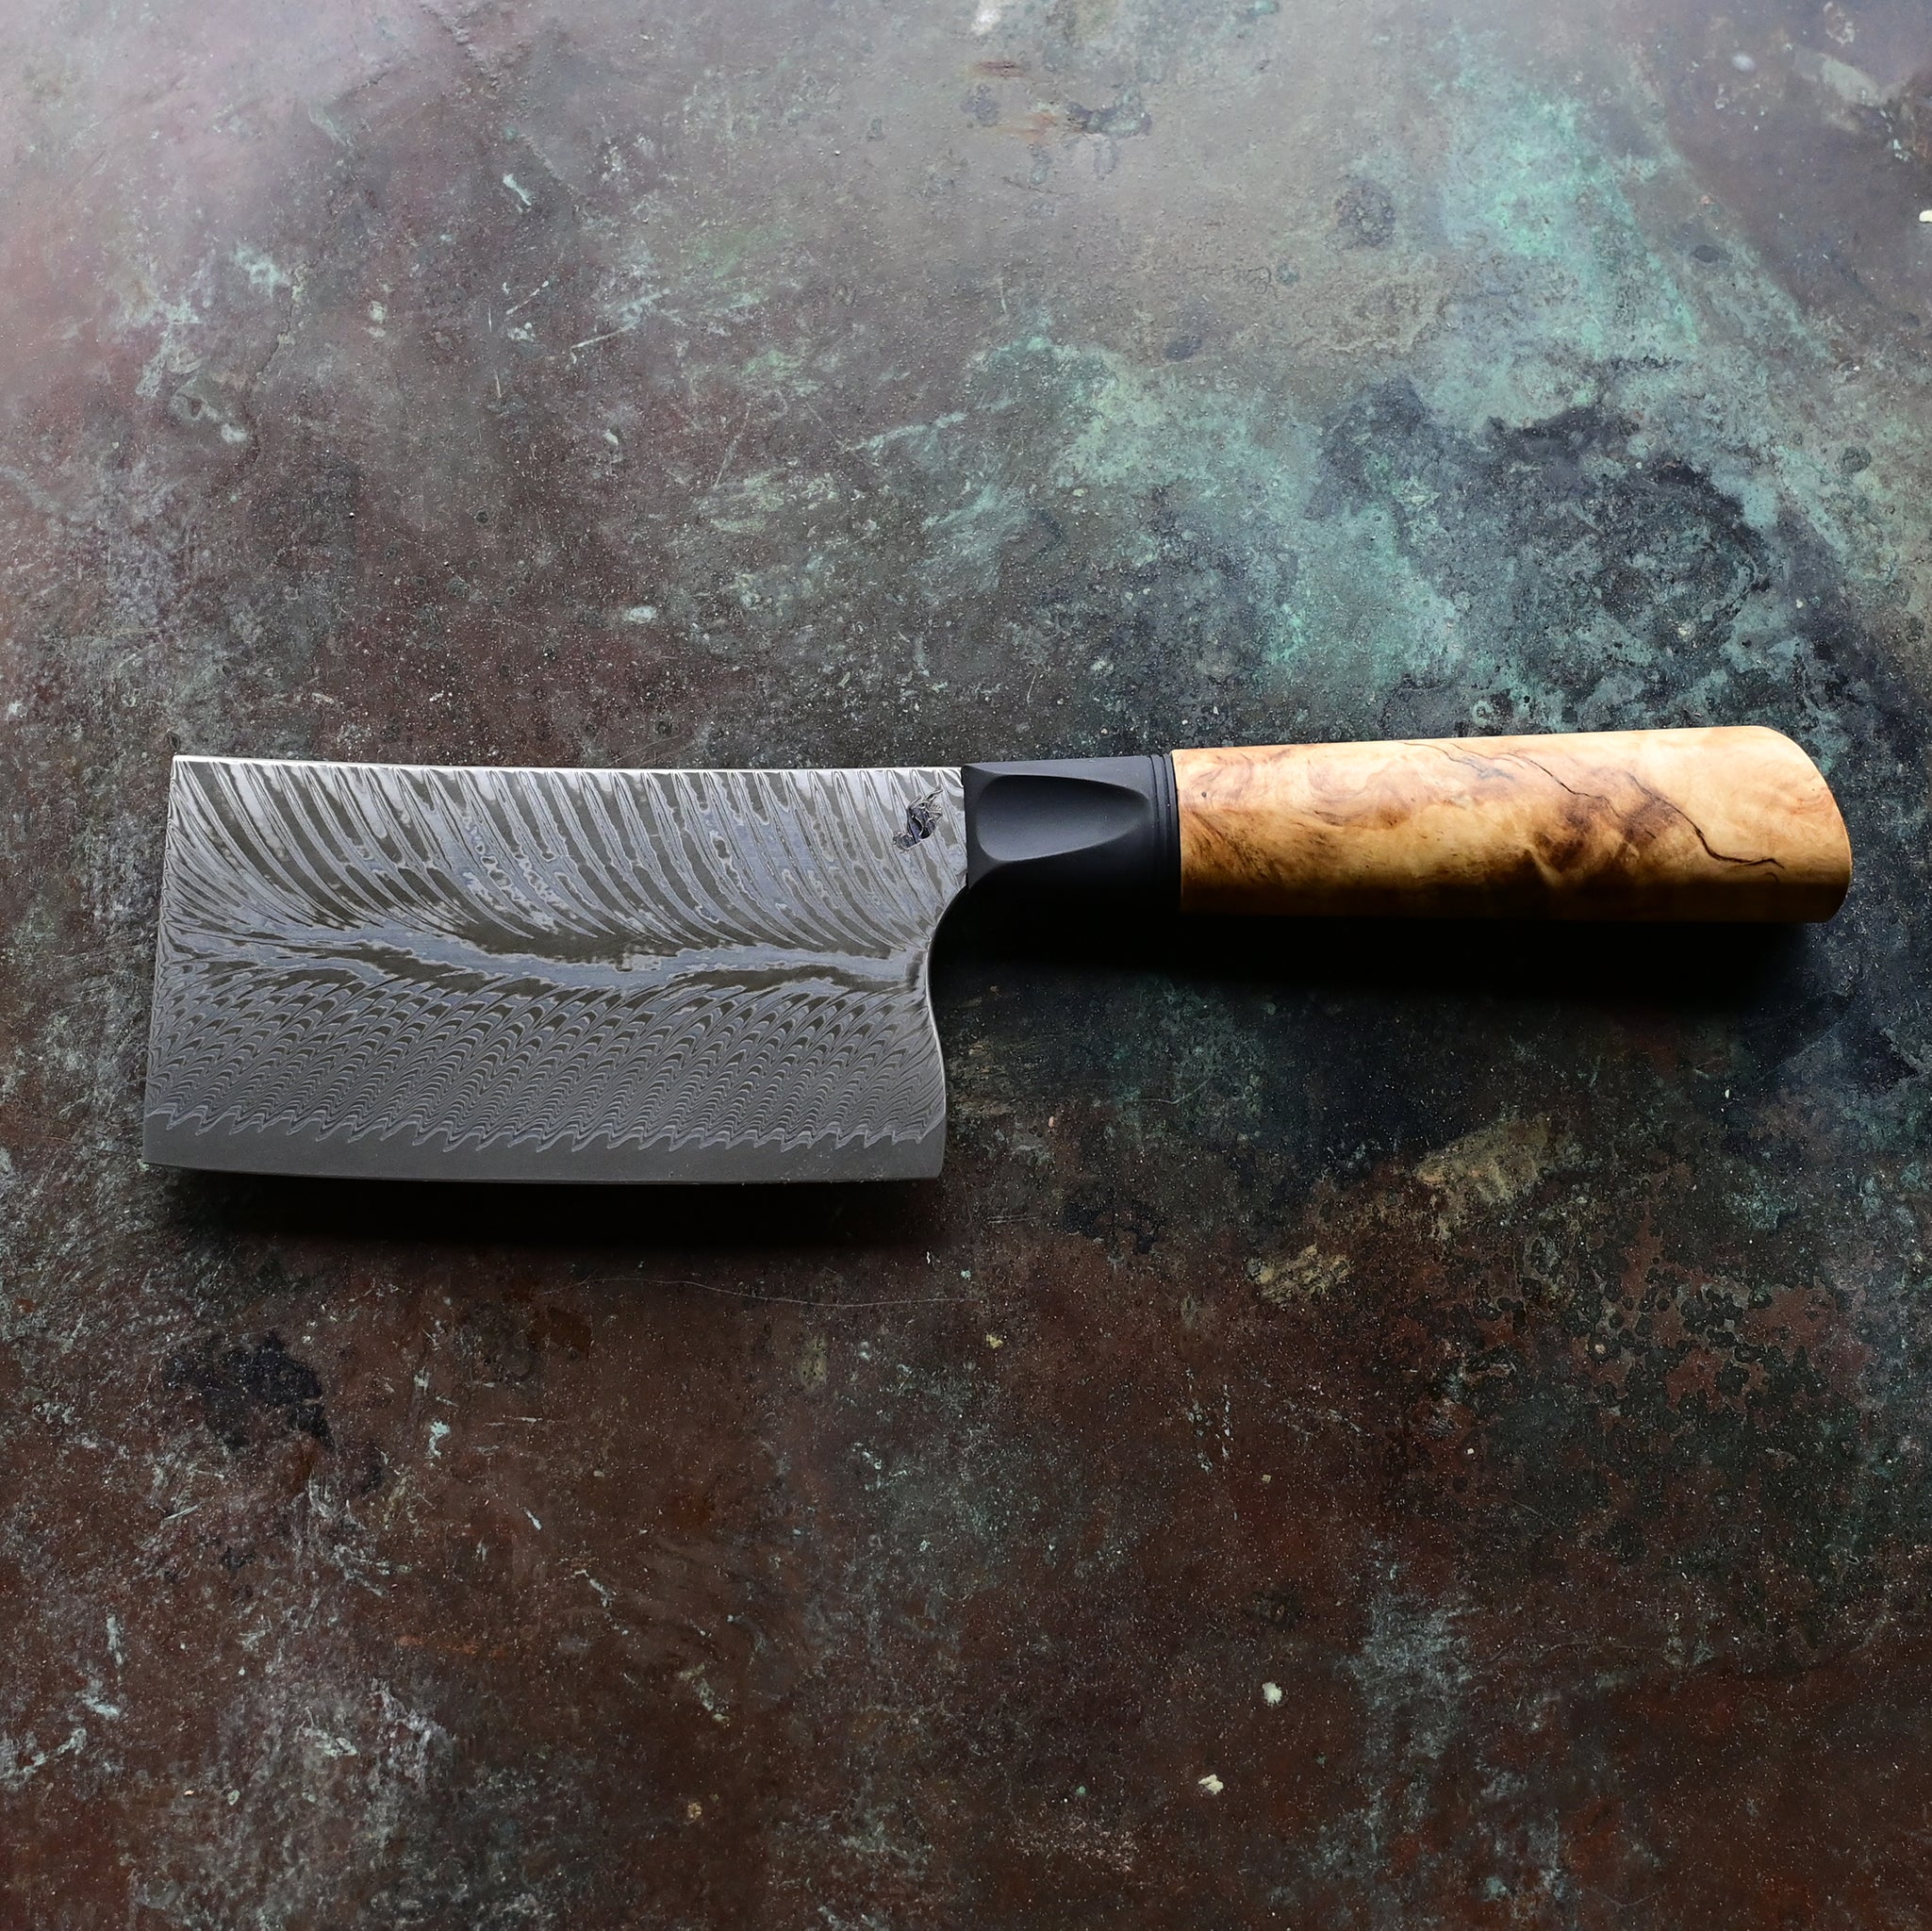 Unique mini cleaver on a concrete background, featuring a 4.5" long feather Damascus VG10 stainless blade, a sleek black anodized bolster, and a stabilized golden Buckeye burl wood handle with intricate patterns and color variations.